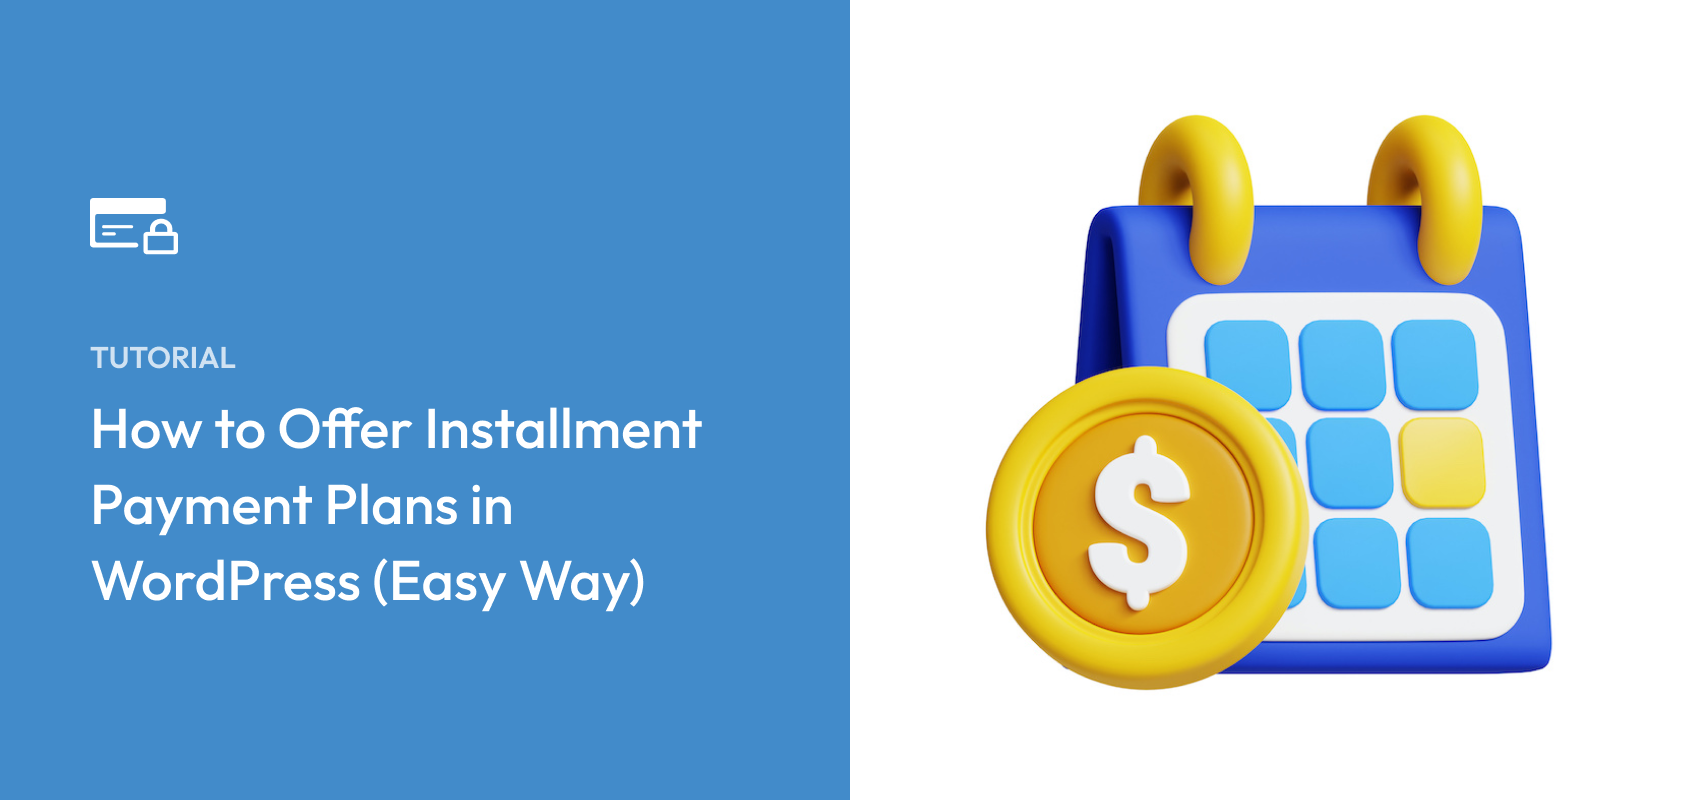 How to Offer Installment Payment Plans in WordPress (Easy Way)